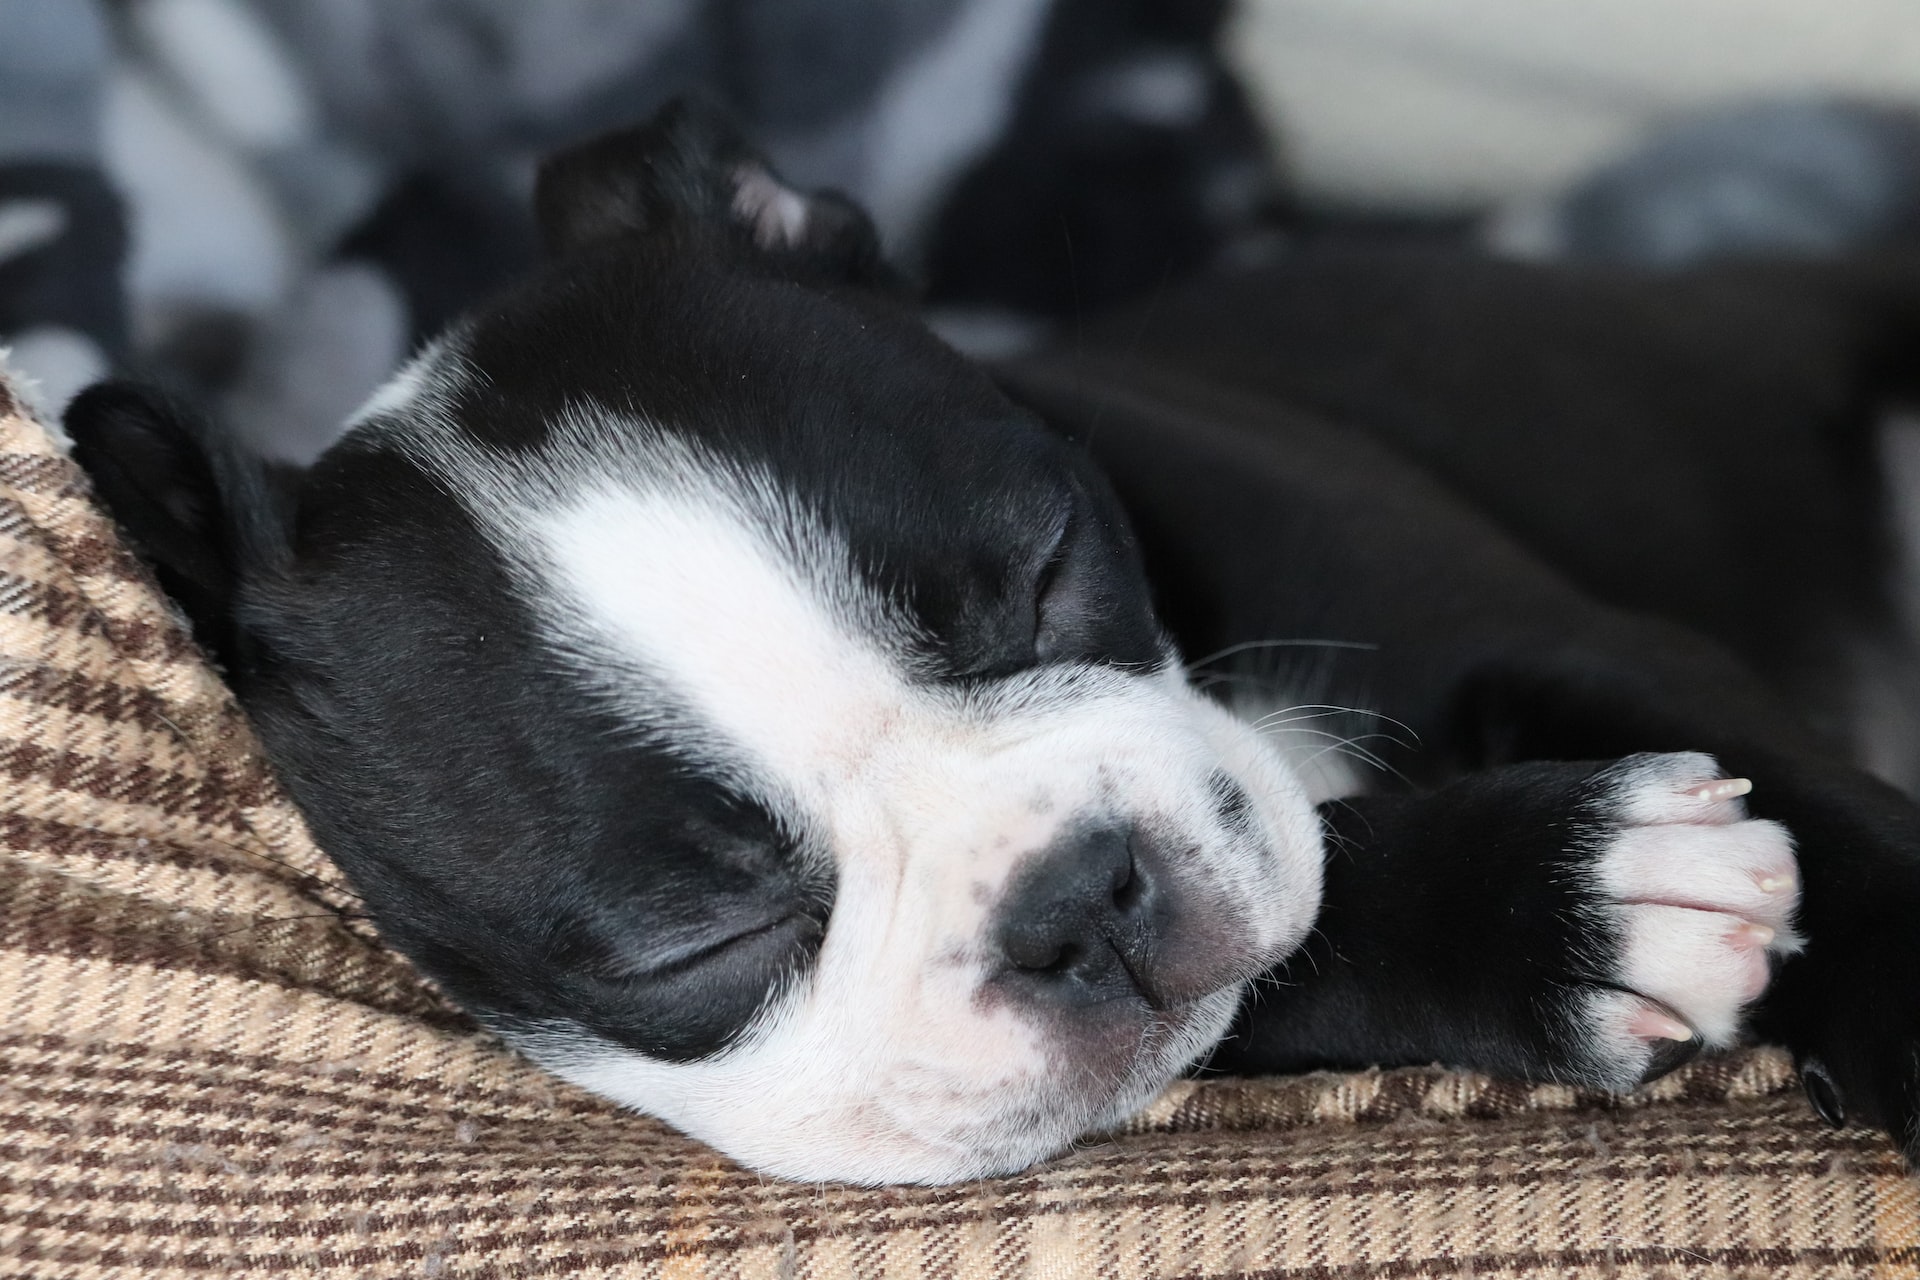 A black and white colored Boston Terrier puppy enjoying a nap. Image by Julie Marsh from Unsplash.